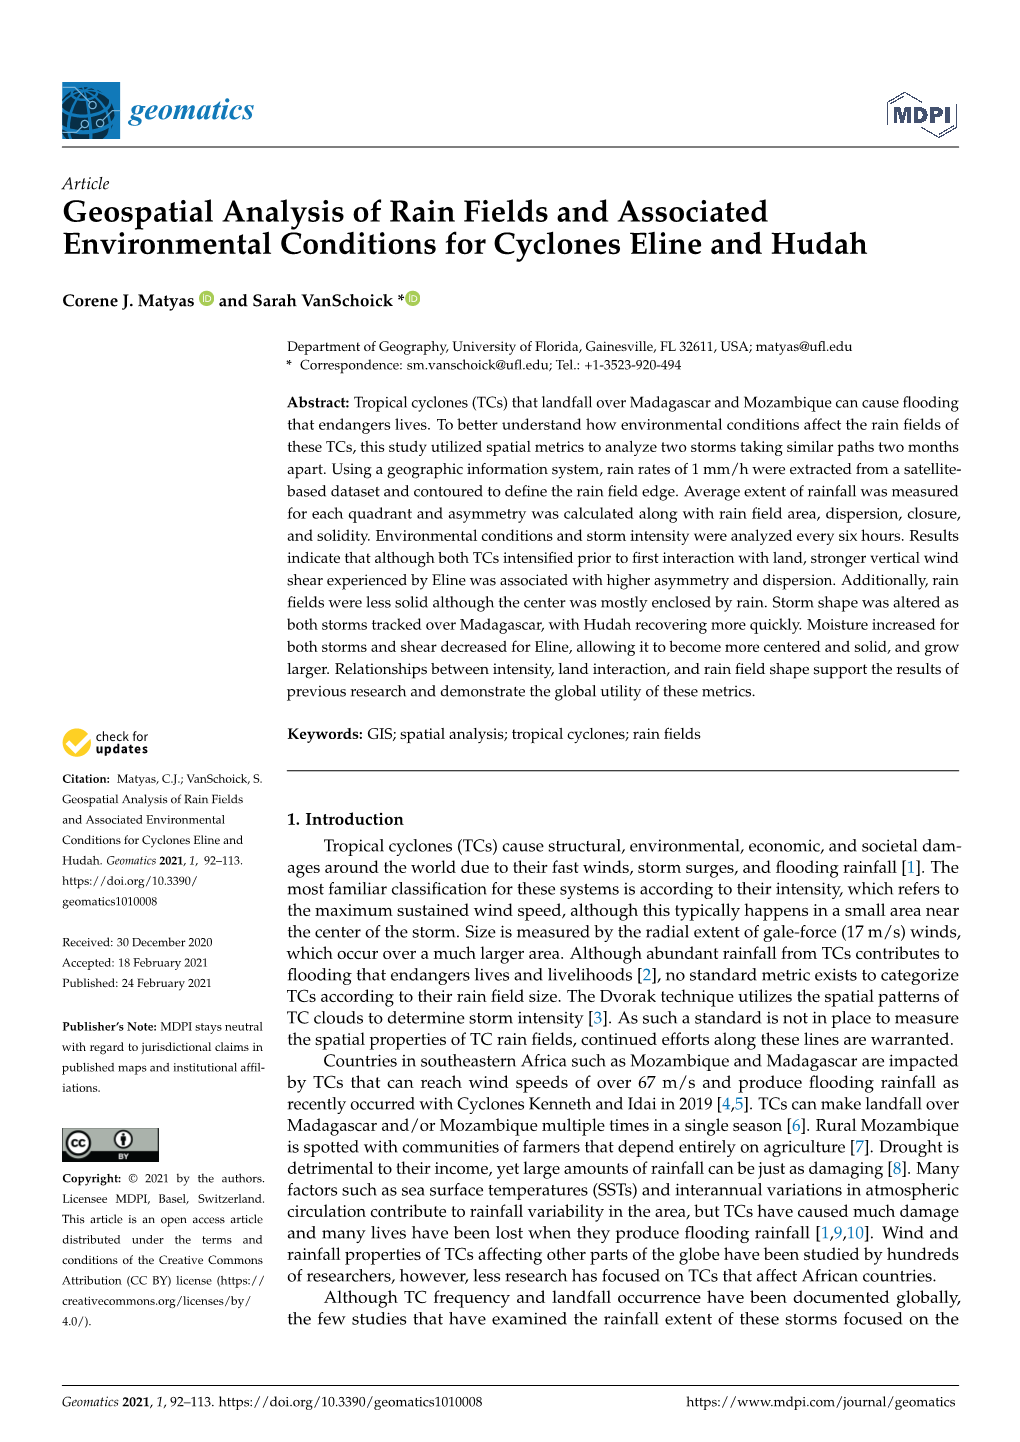 Geospatial Analysis of Rain Fields and Associated Environmental Conditions for Cyclones Eline and Hudah